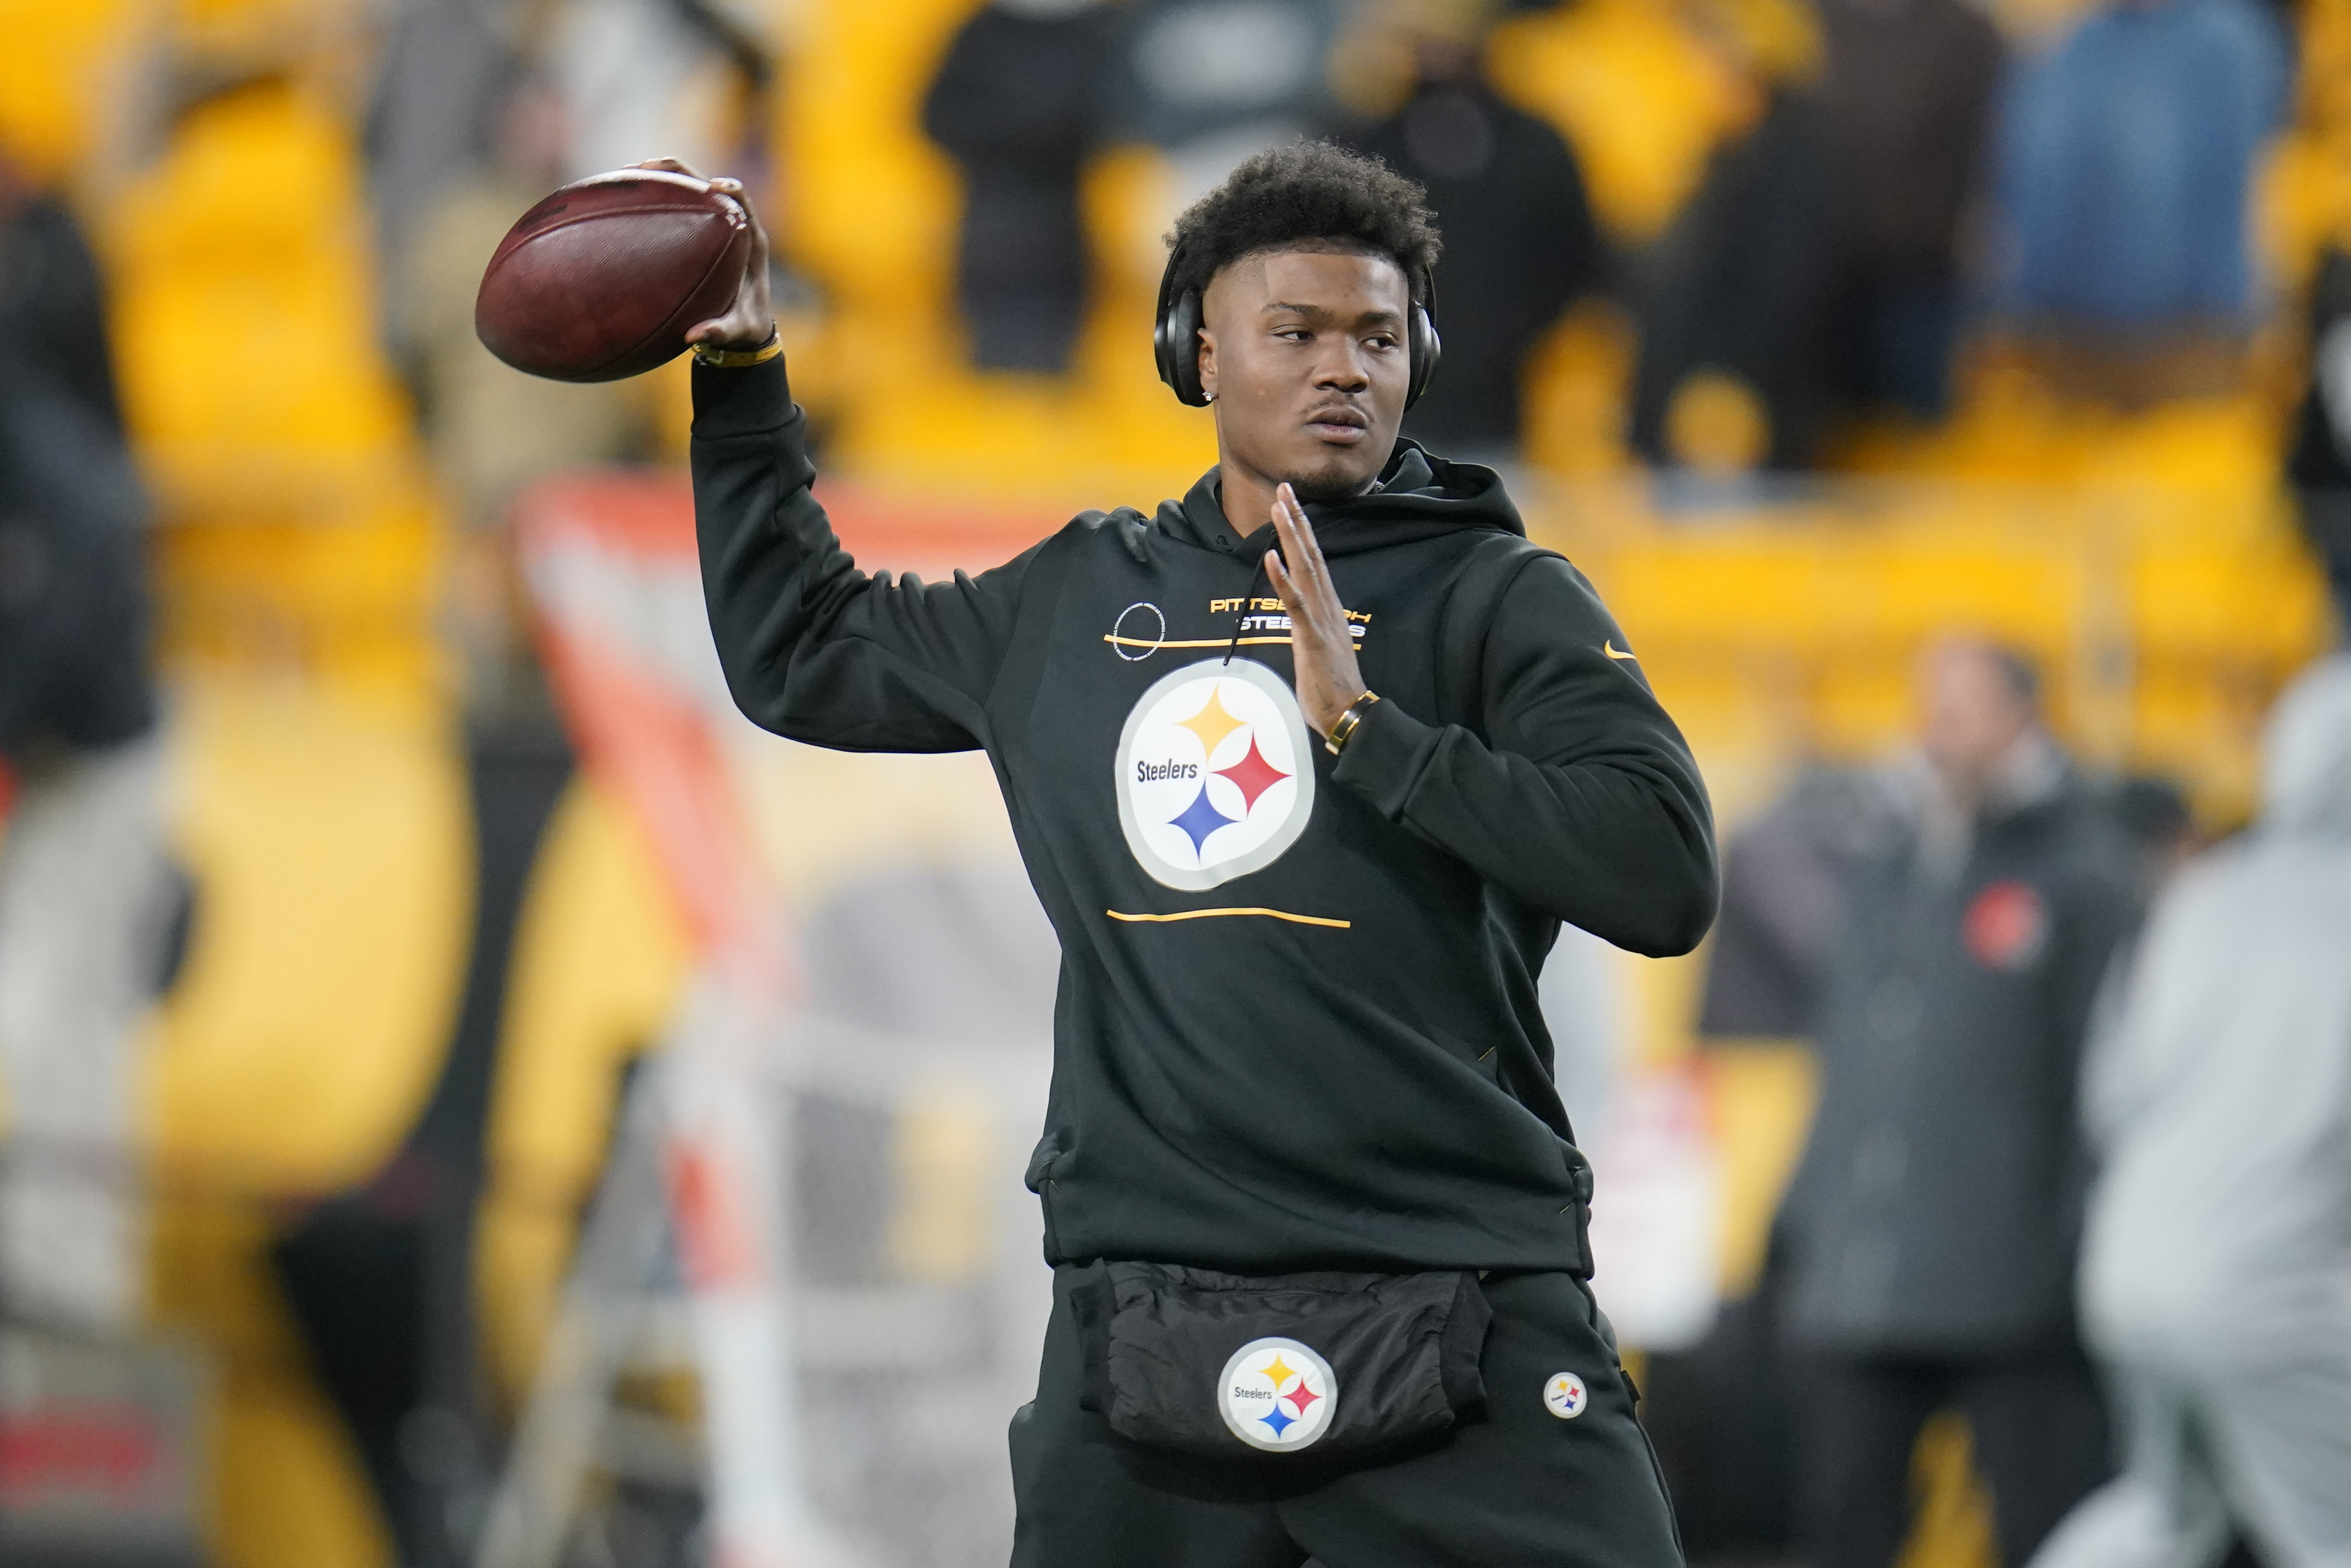 BR: Steelers video clip